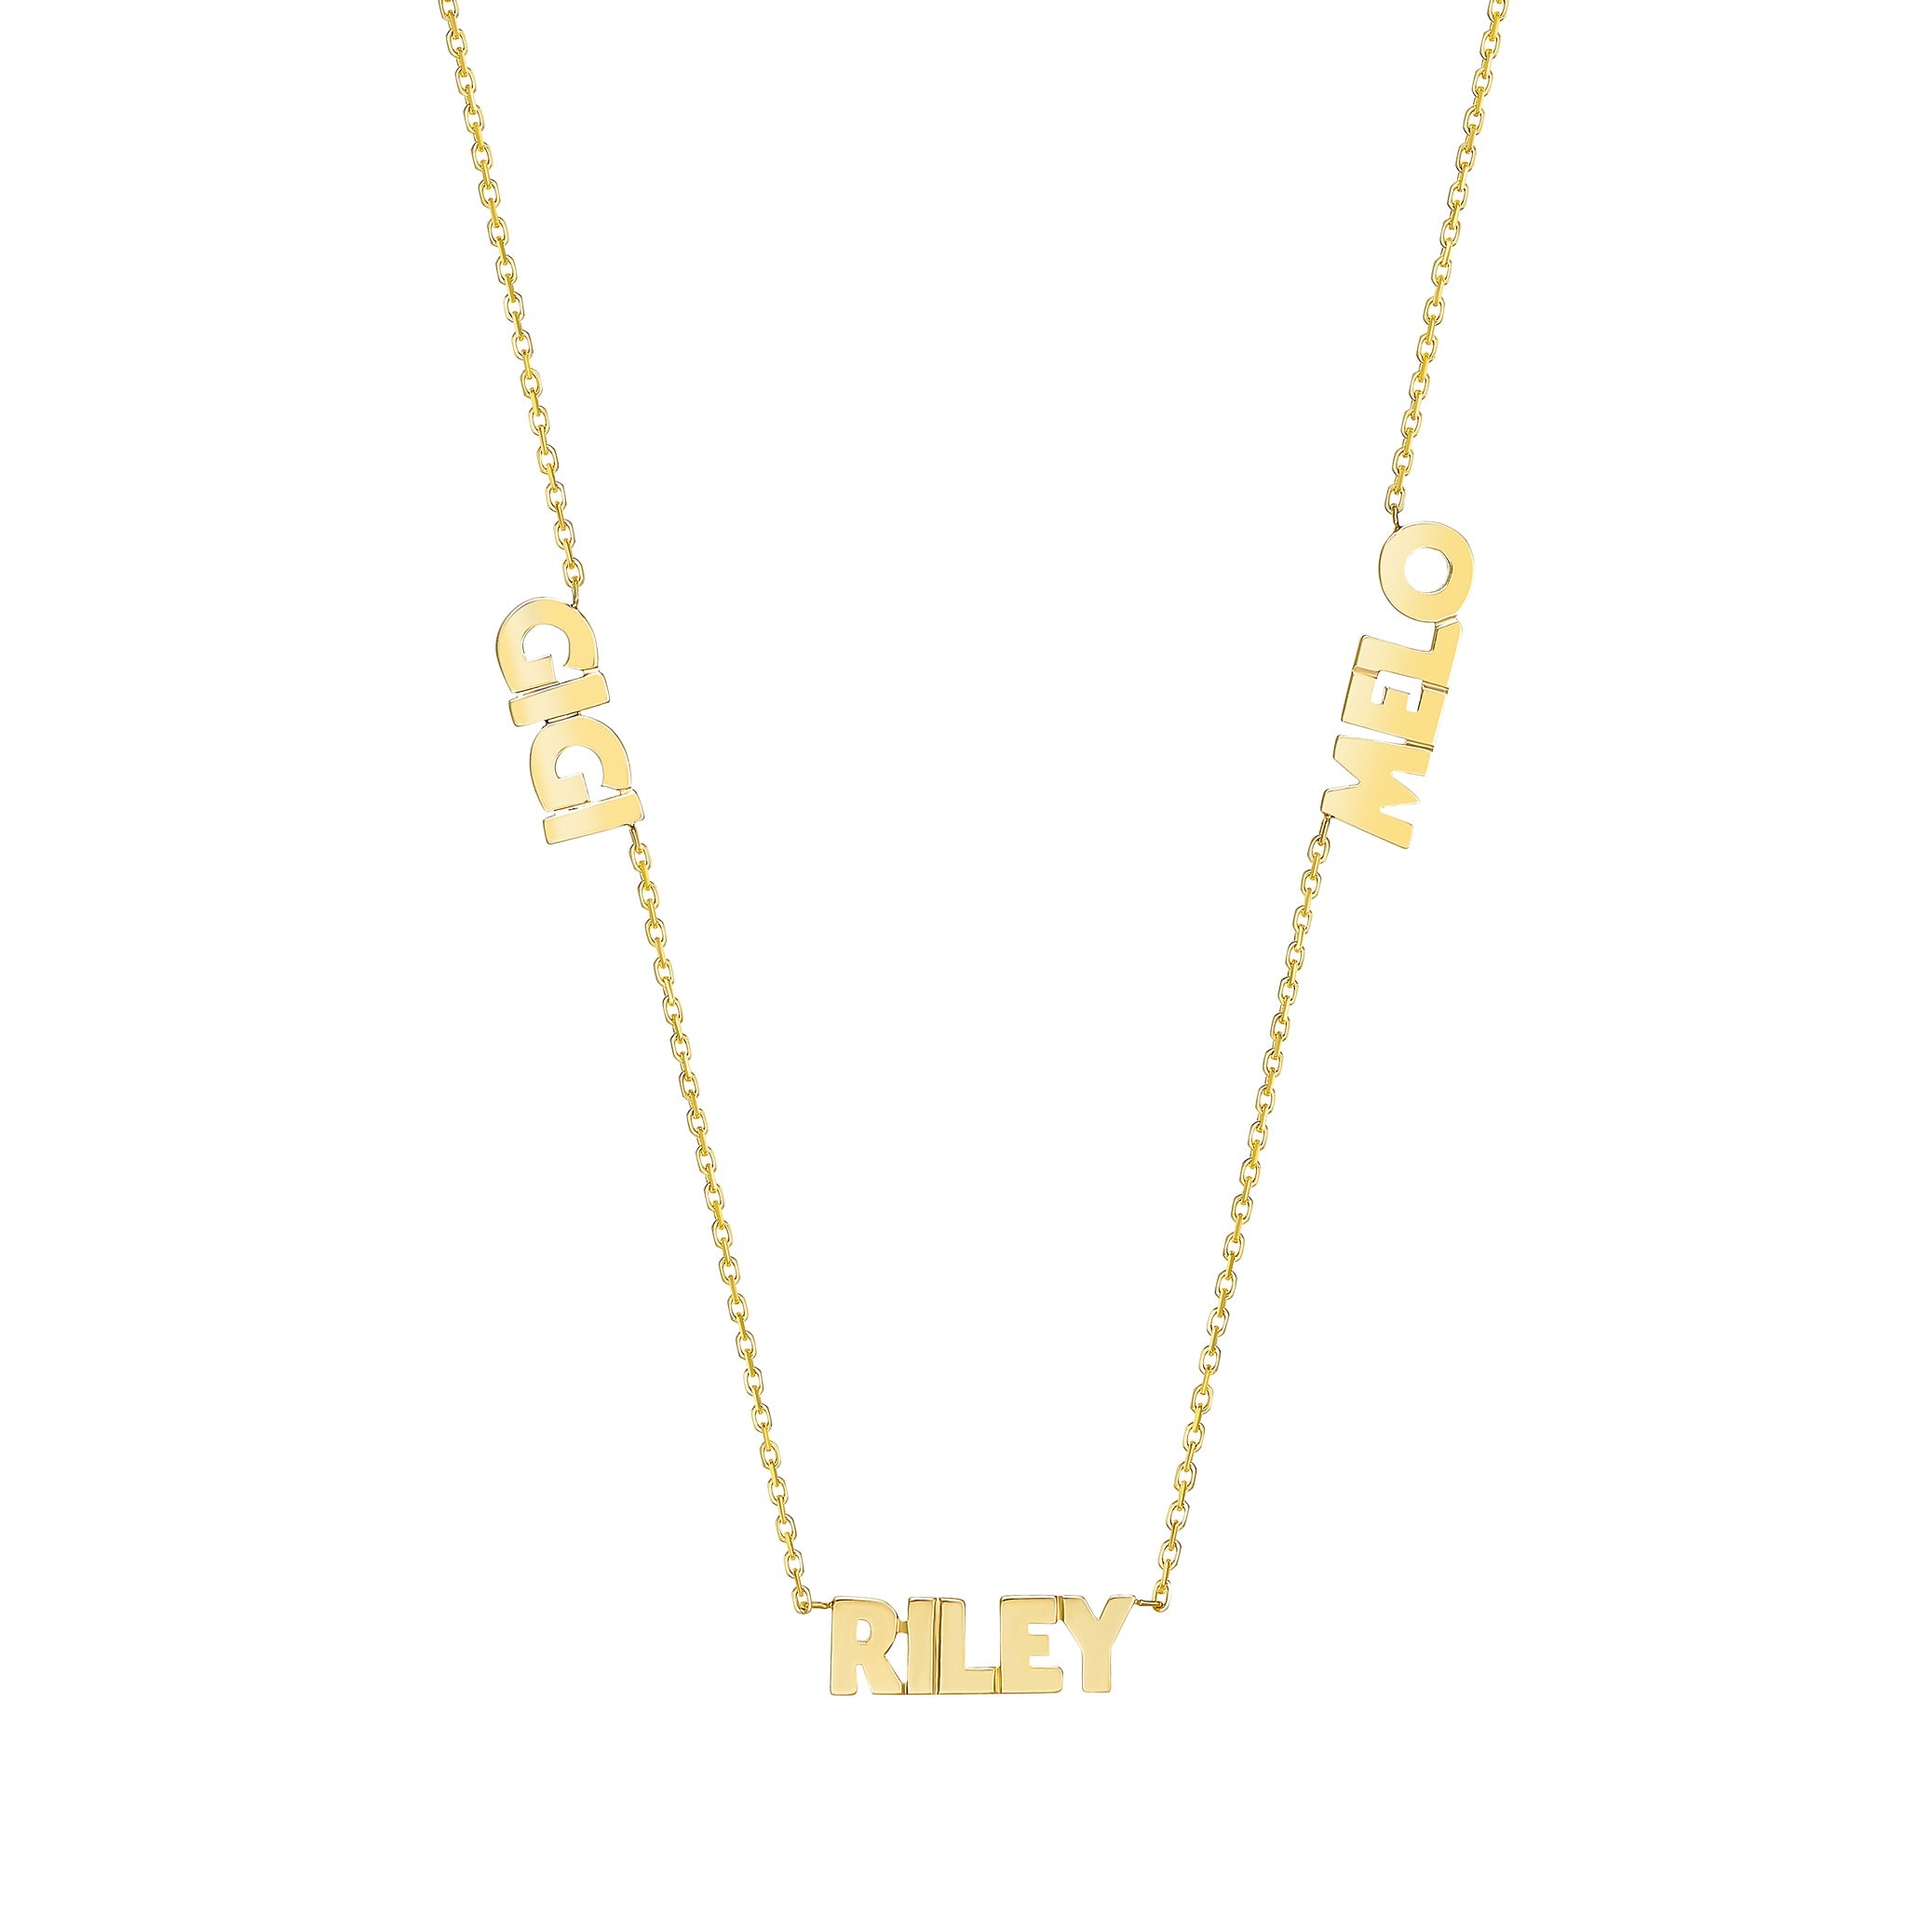 Multi Names - 14K Gold Personalized Uppercase Multi Name Necklace ...